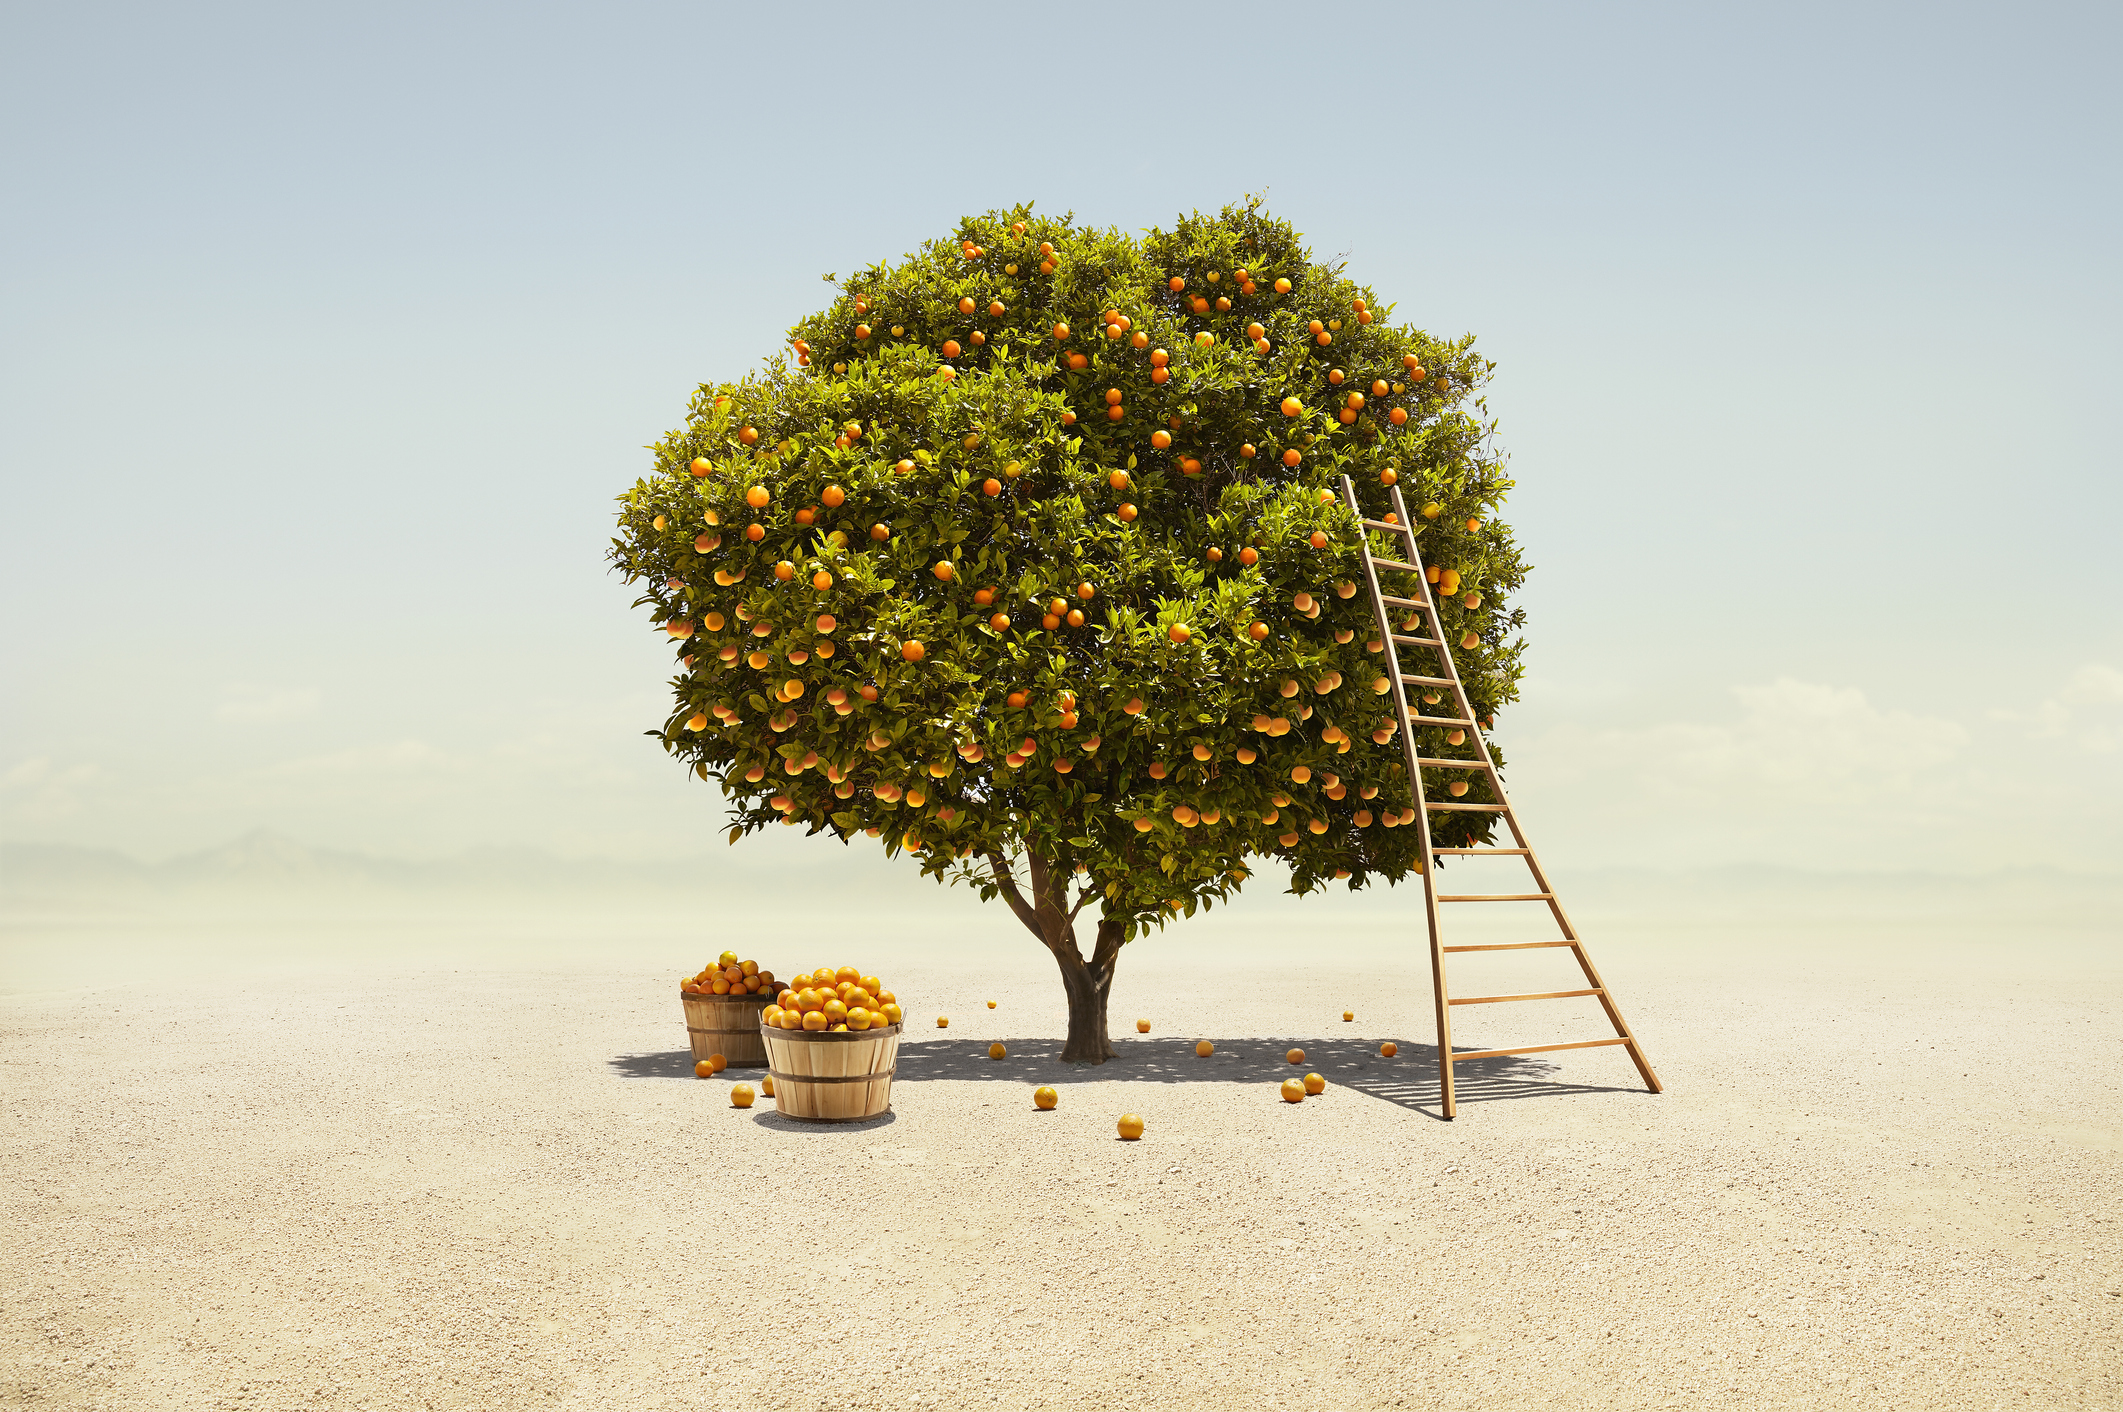 A fully fruity orange tree harvested in an arid Southern California desert landscape;  novice investors thrive in recession